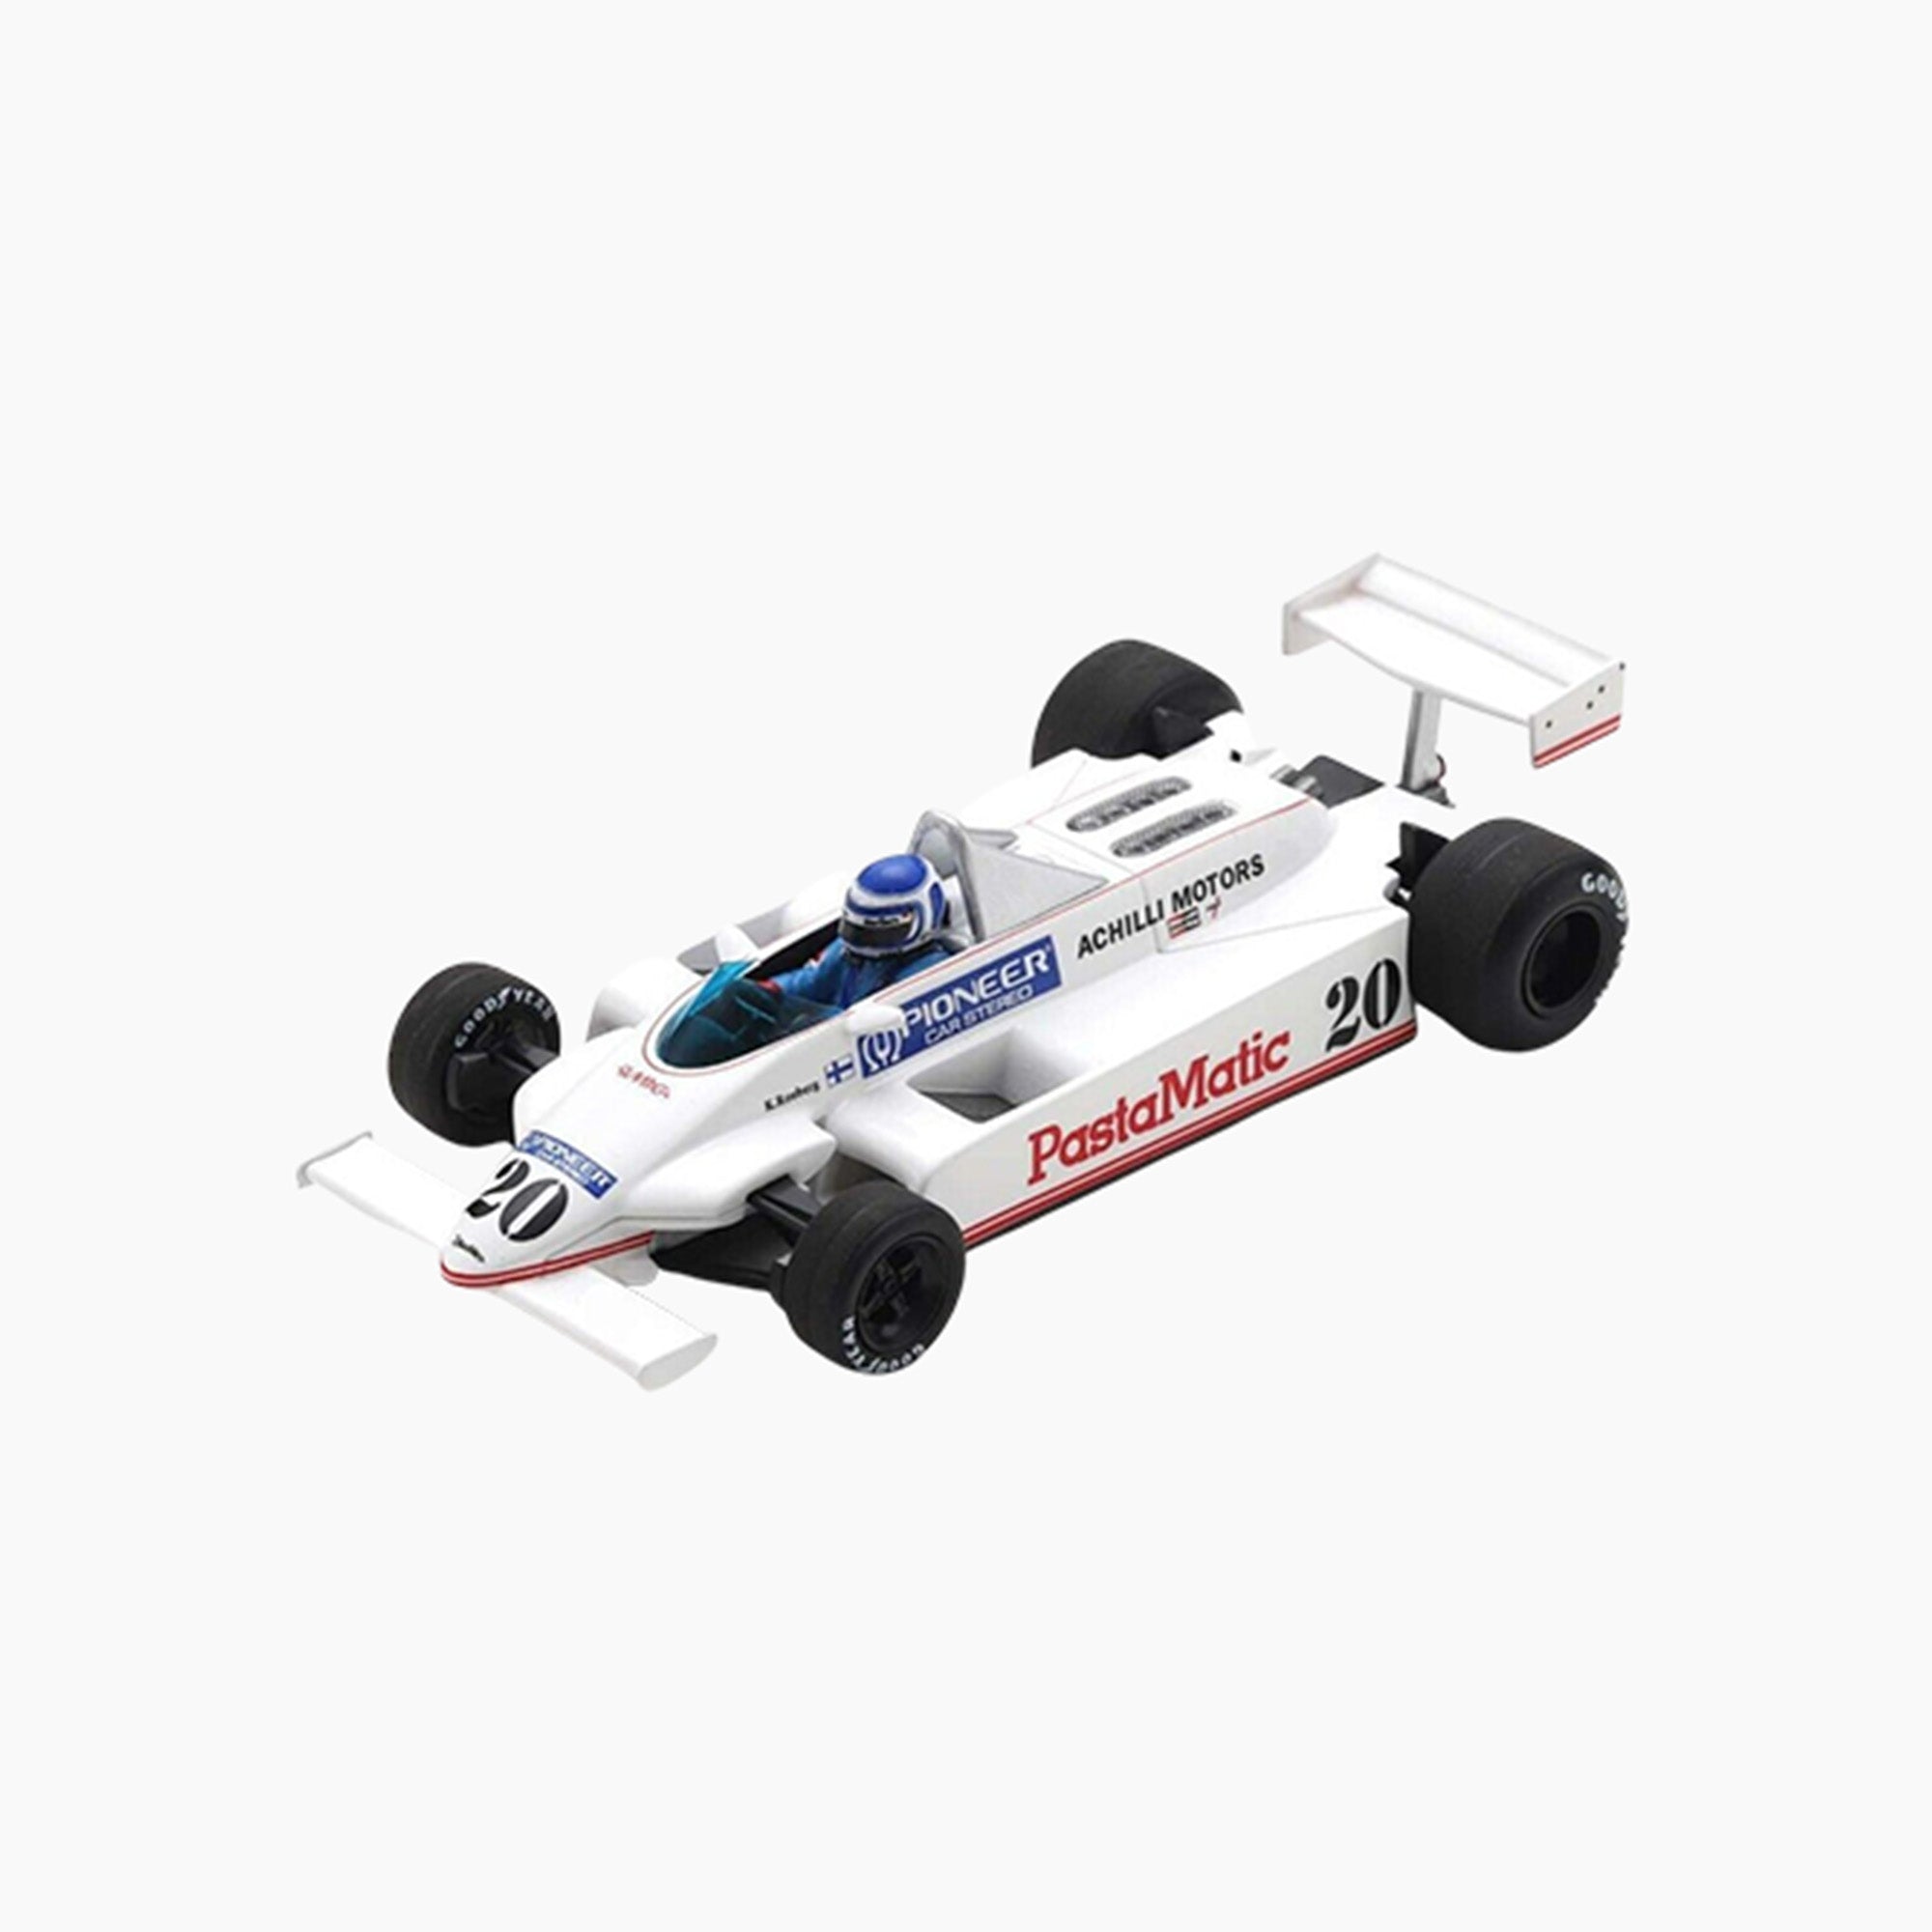 Scale Models | Collection of Scale Model Cars by GPX Store